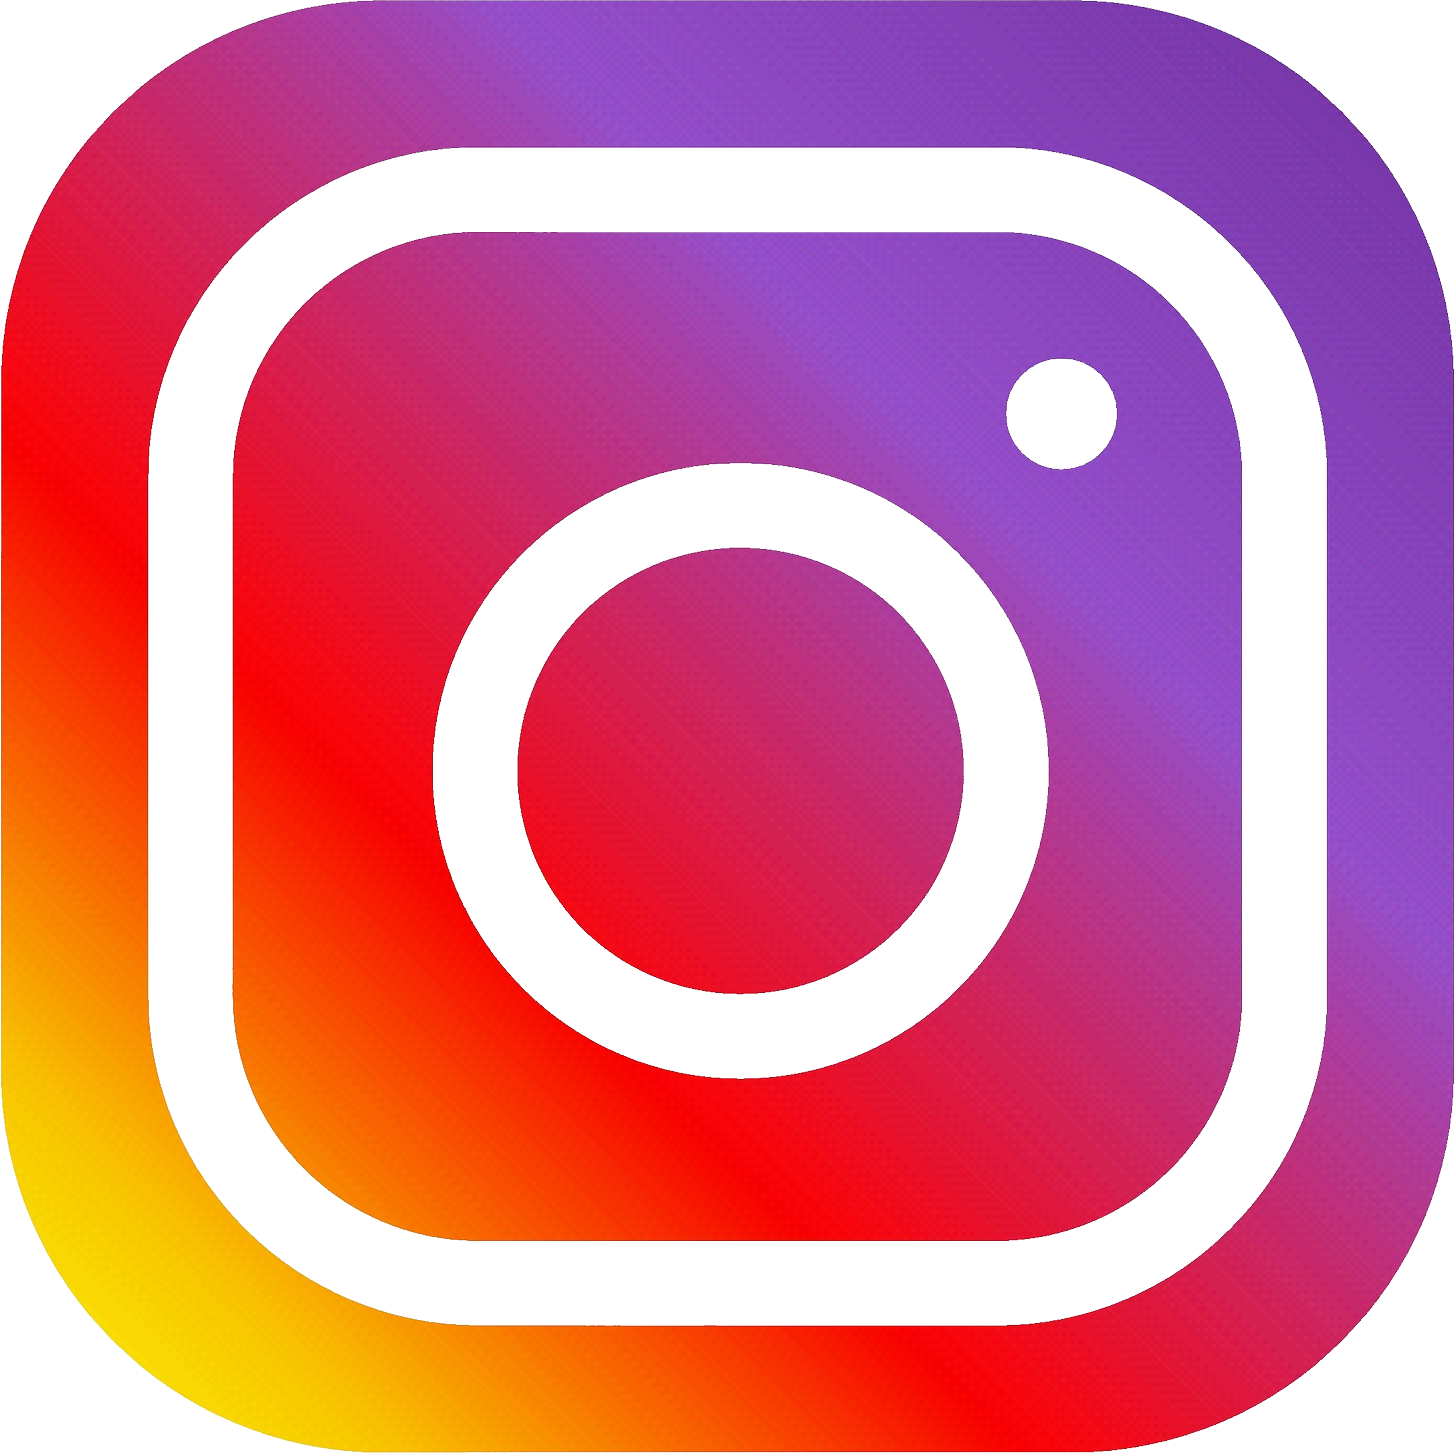 Click here to visit the Cuckfield instagram page